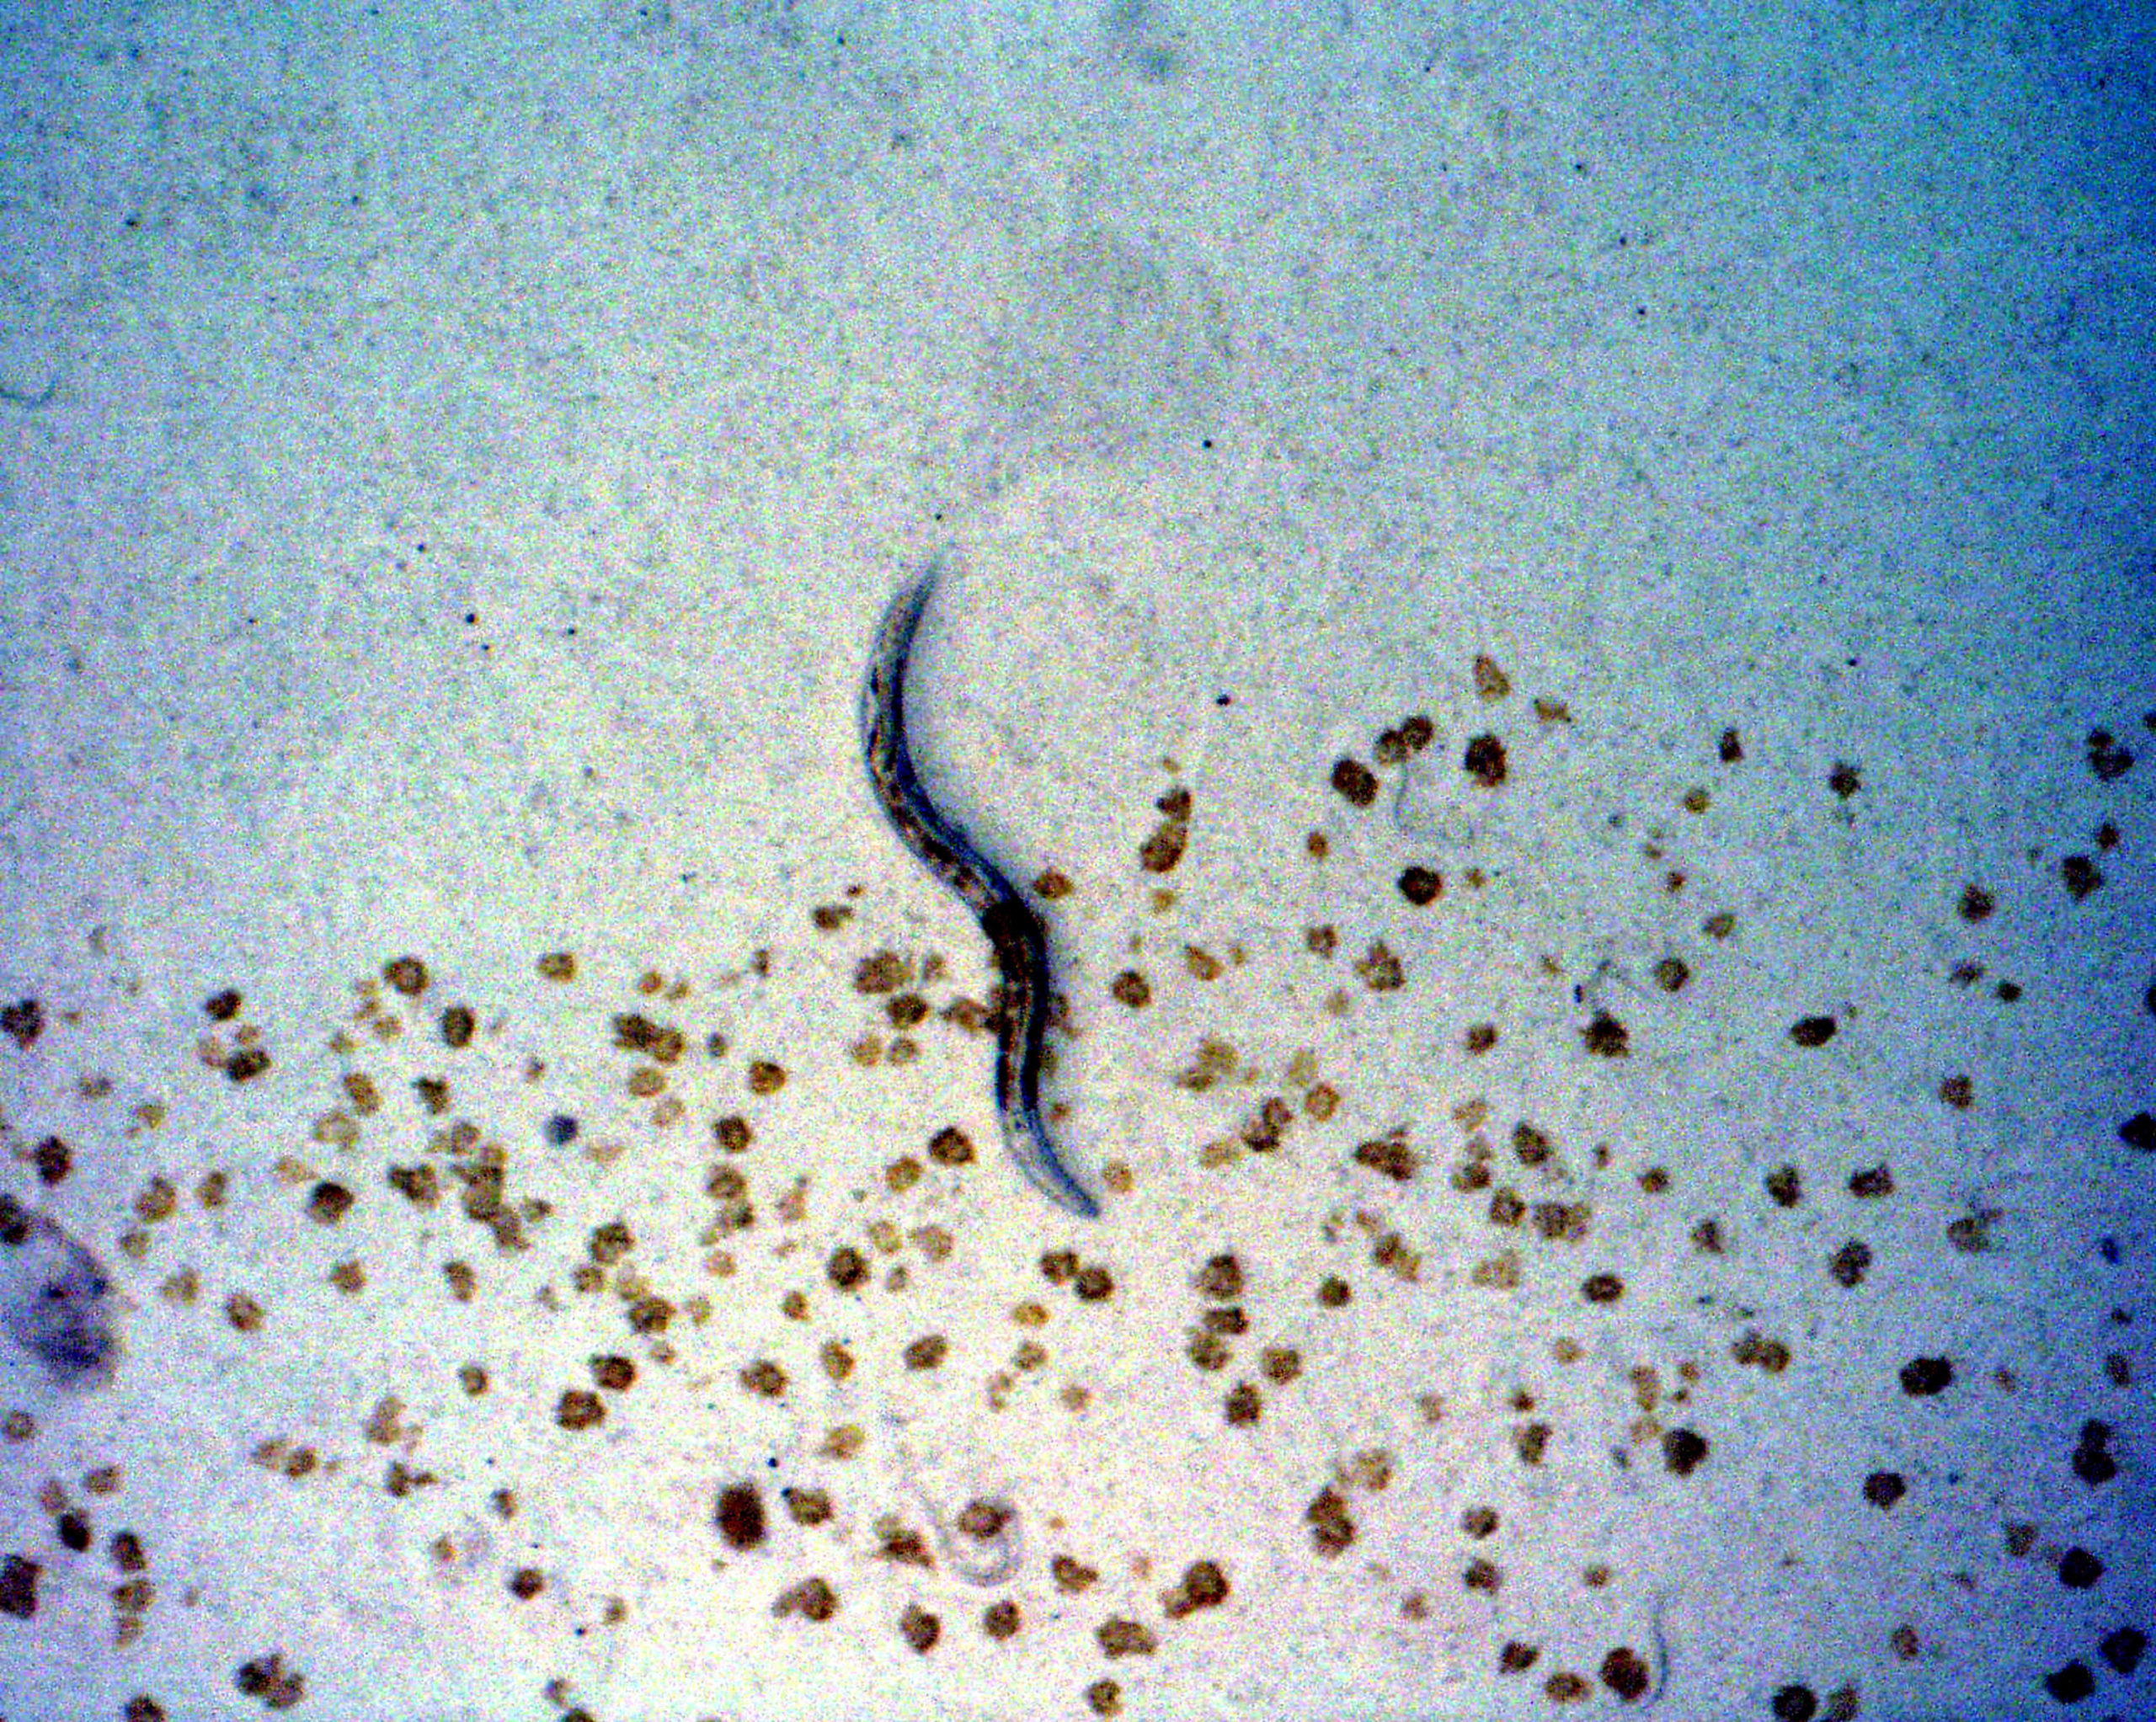 A nematode that was in space and survived the Space Shuttle Columbia crash in 2003. (Photo: Volker Kern/NASA/Getty Images, Getty Images)